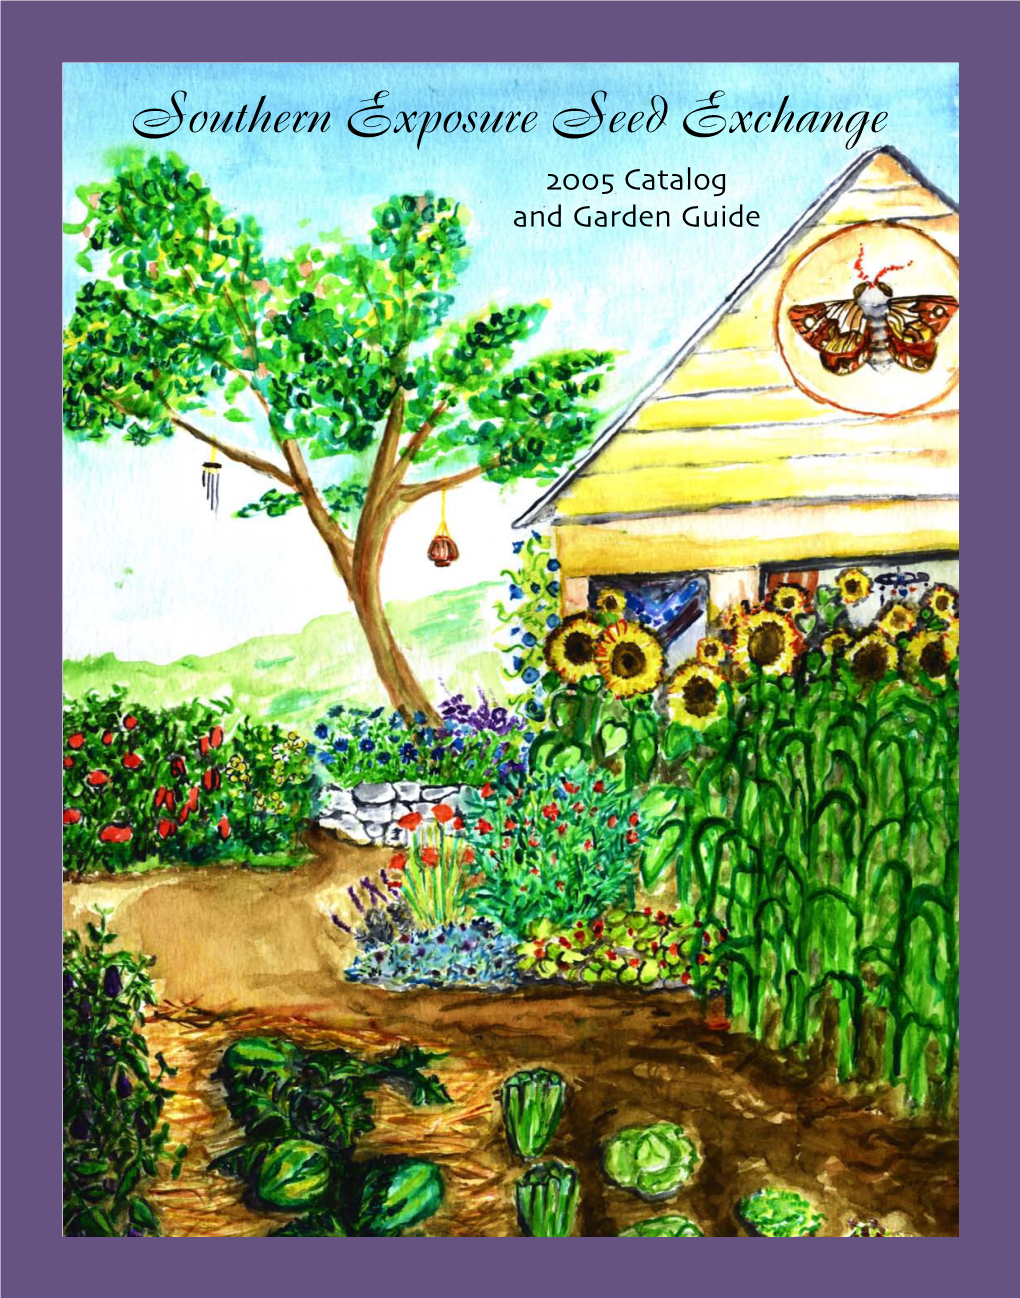 Southern Exposure Seed Exchange 2005 Catalog and Garden Guide